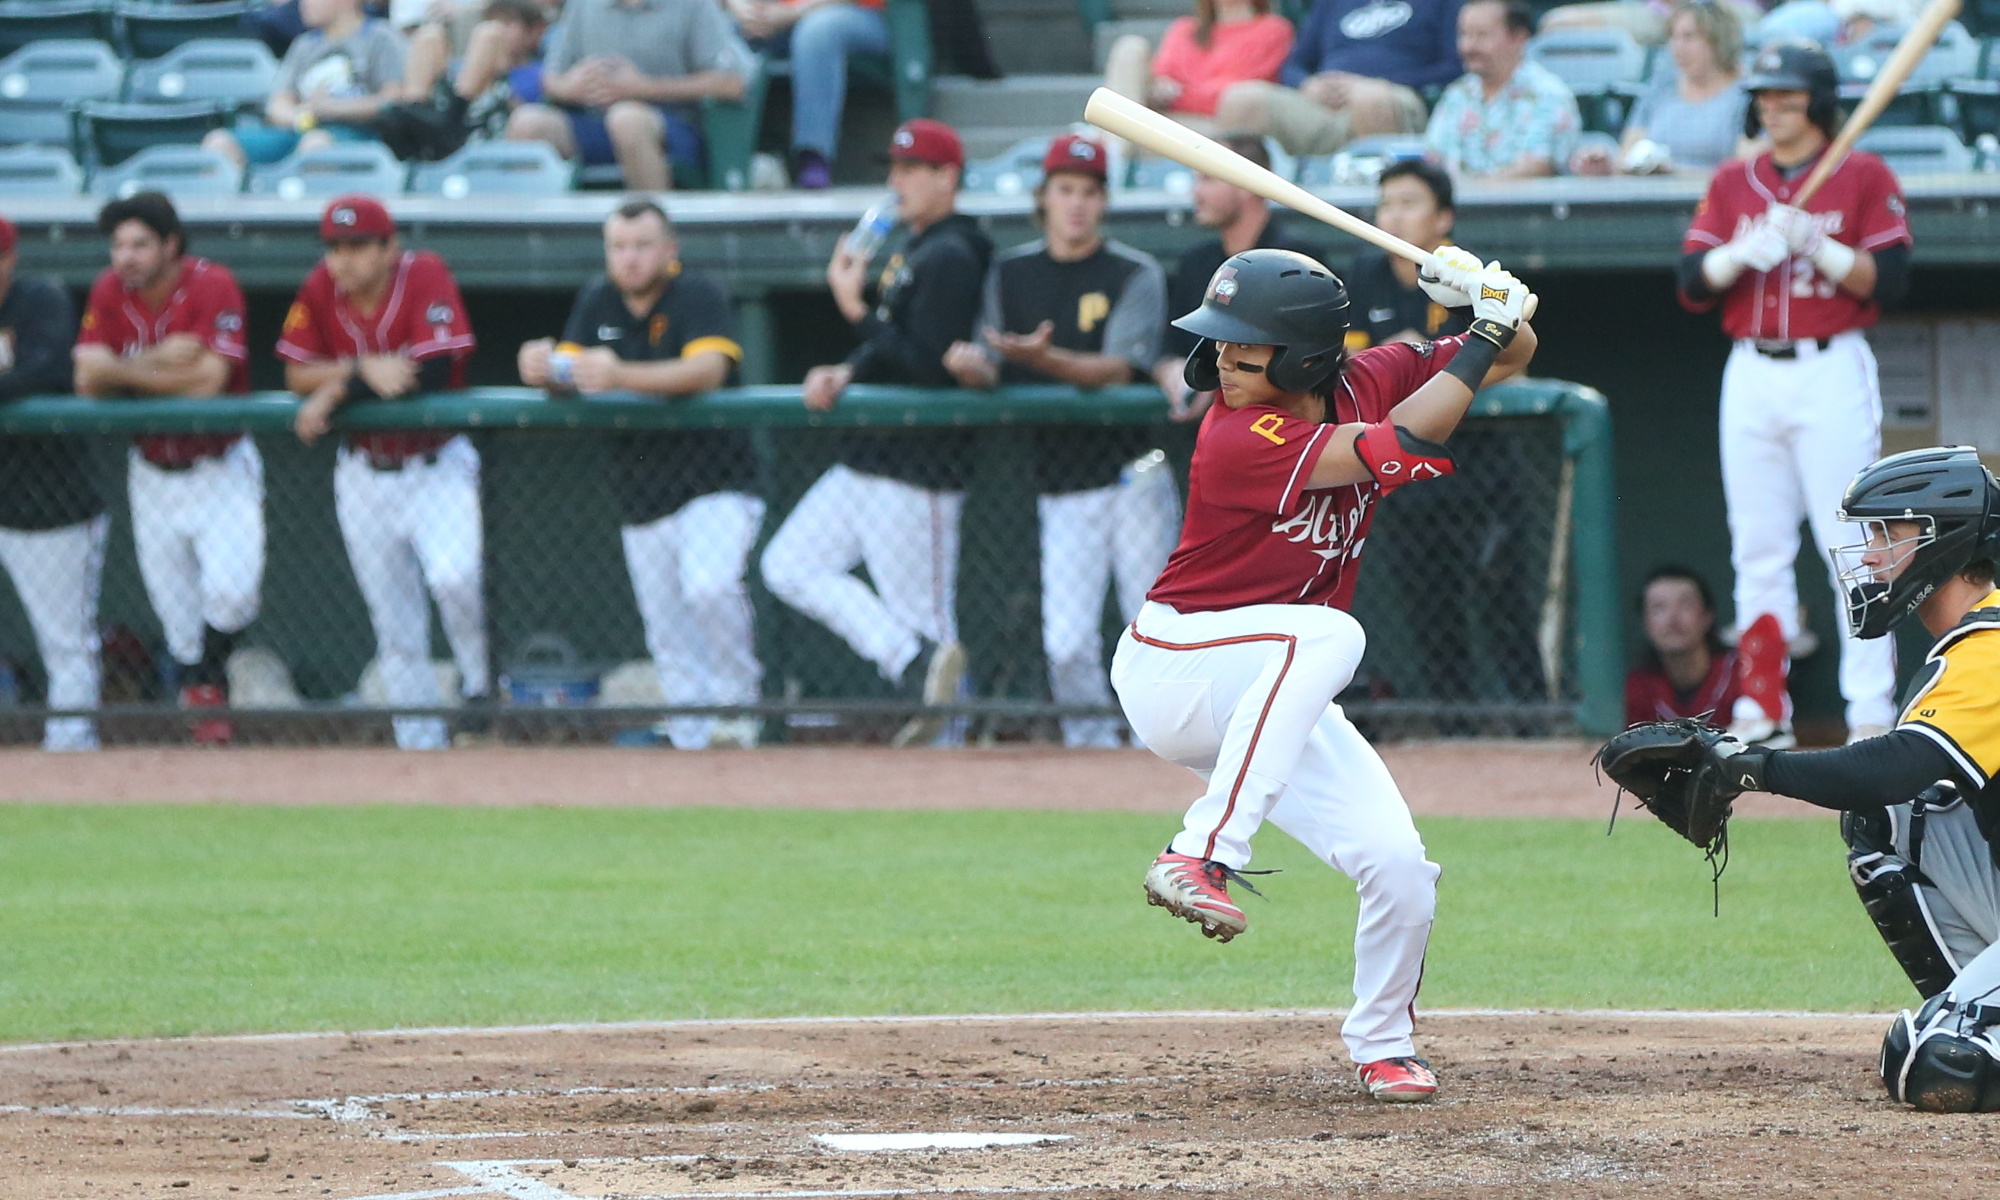 AFL Recap: Pirates Prospects Collect Hits and Steals in Monday’s Loss